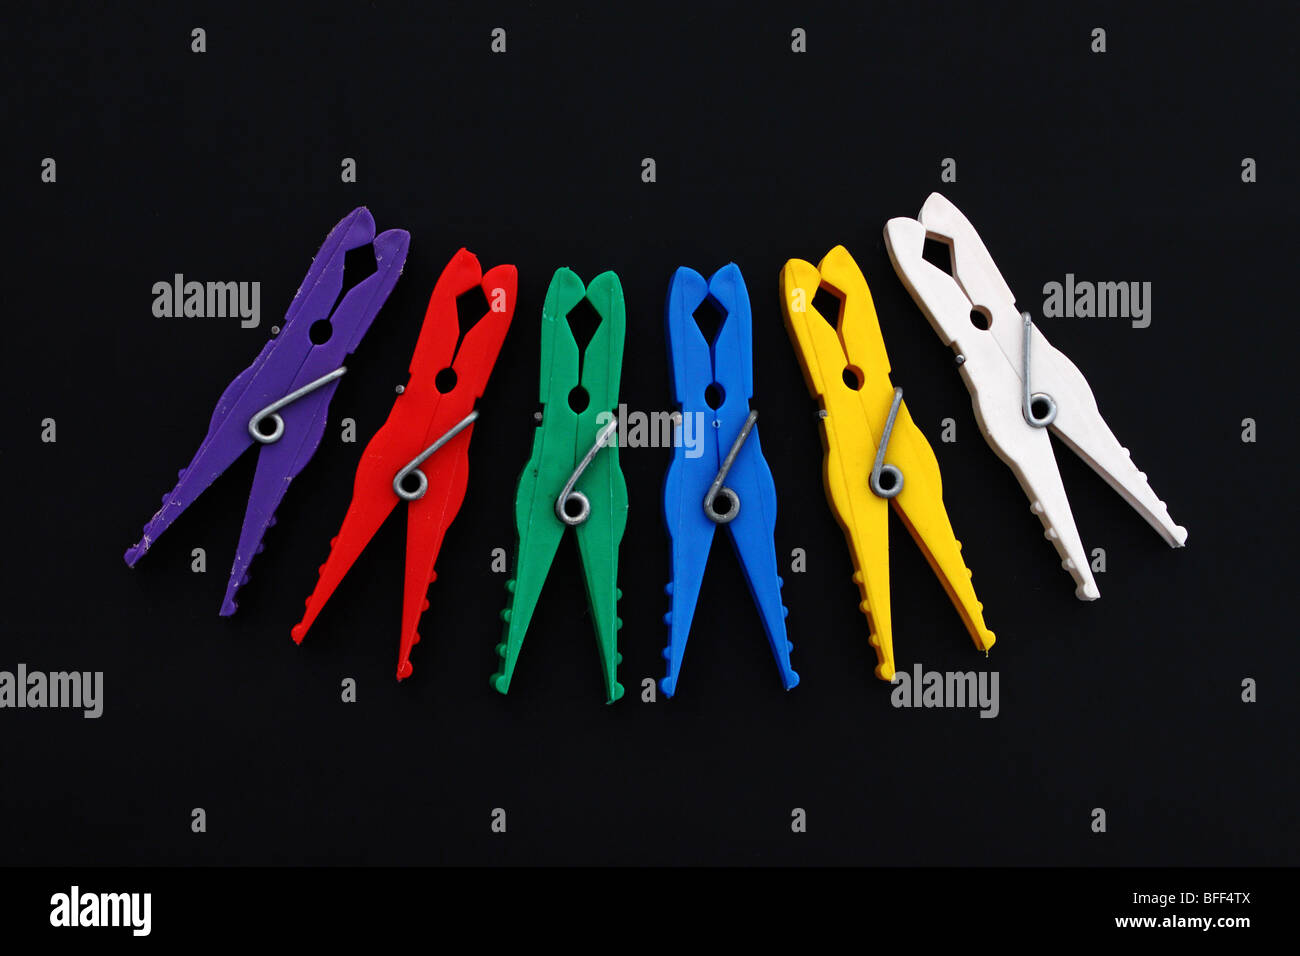 Multicolor laundry clips on black background Stock Photo